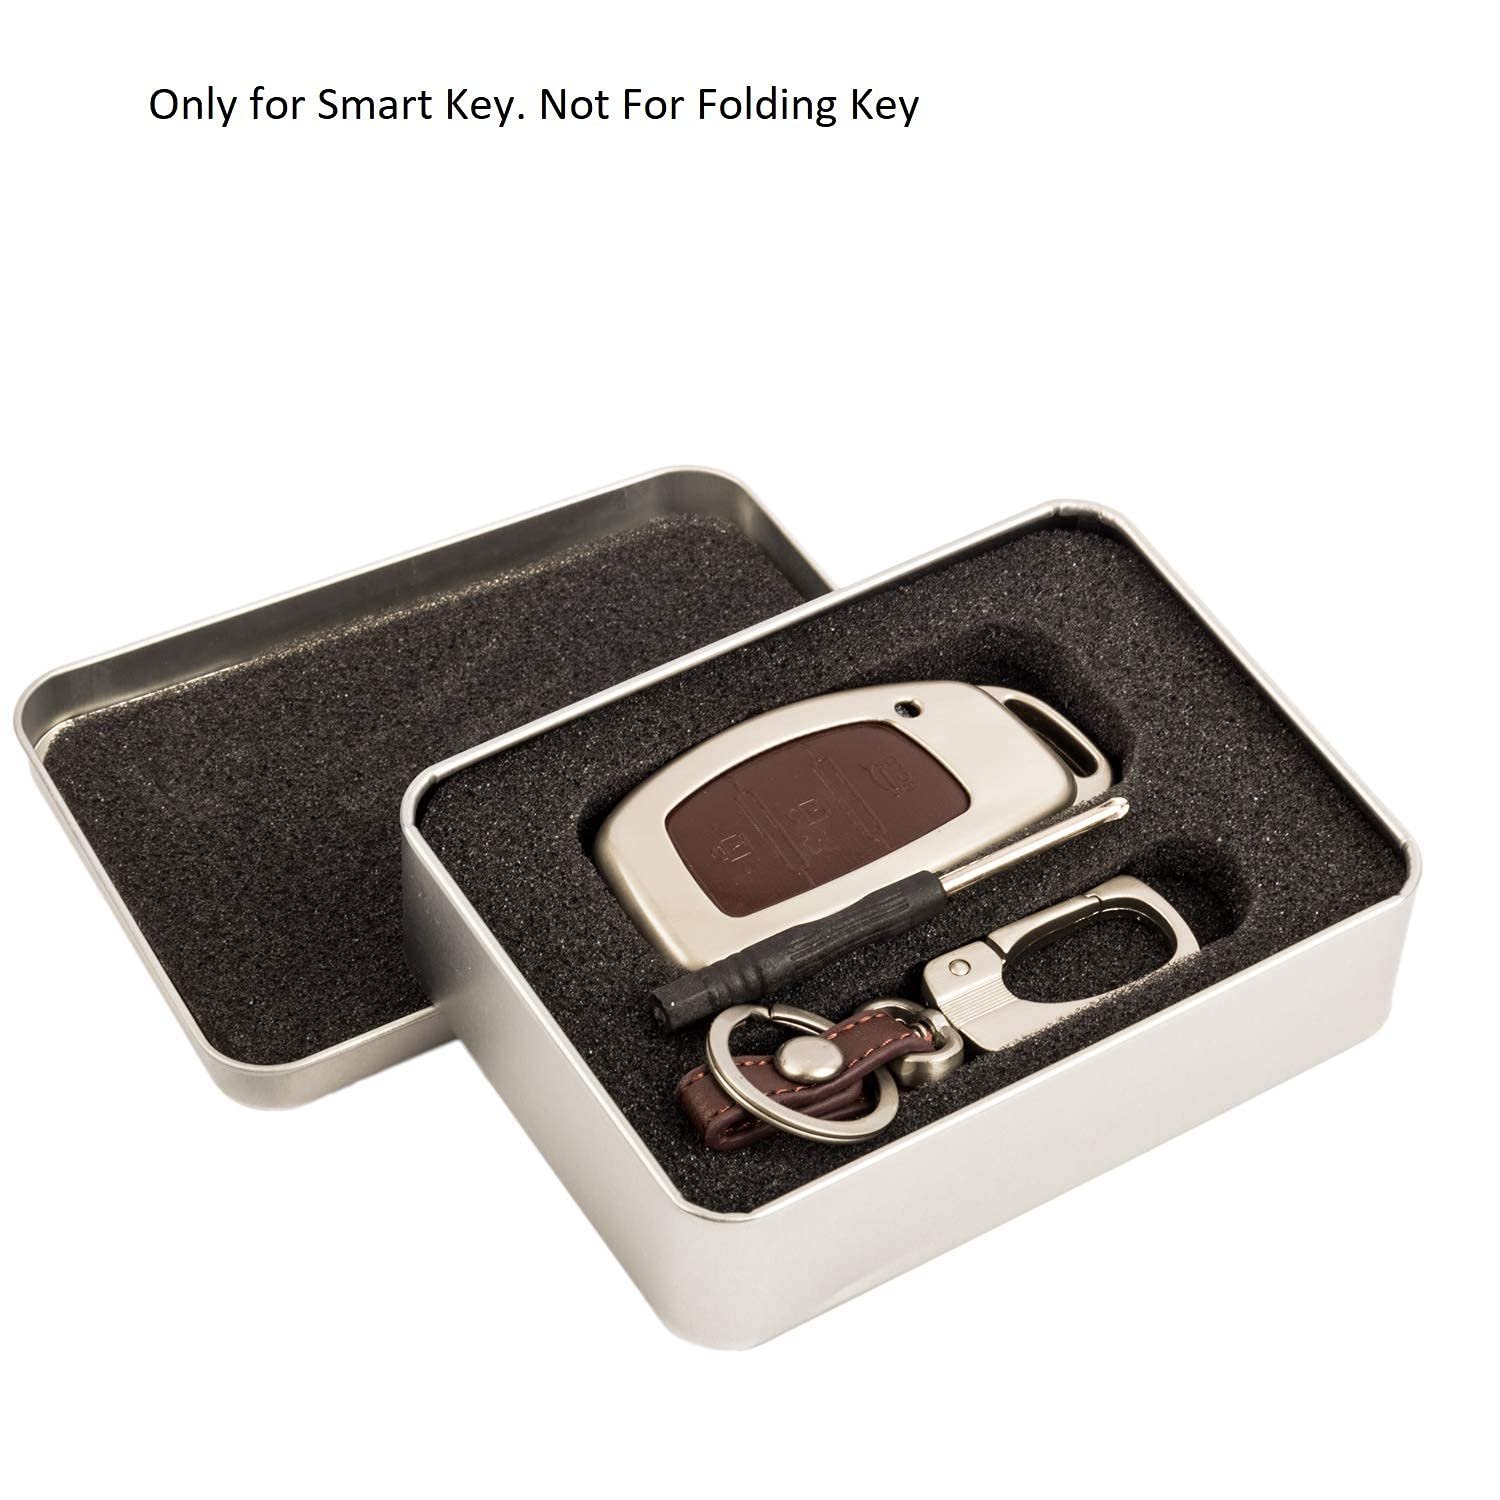 Car Key Cover Case Fob Compatible with Hyundai Elite Creta Made up of Zinc Alloy and Brown Leather